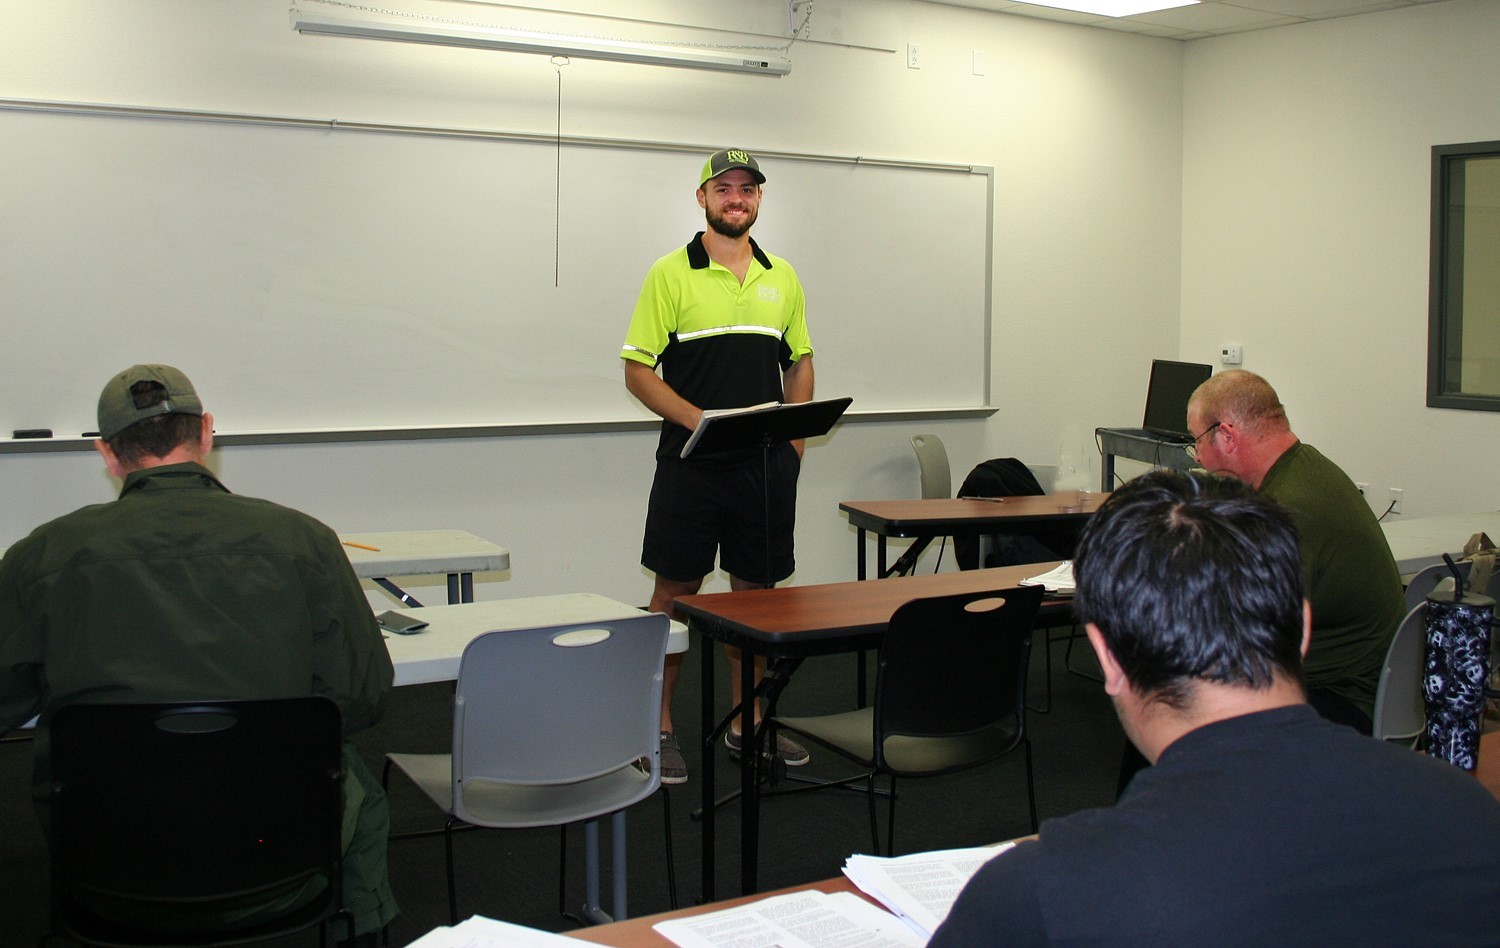 PJC-Sulphur Springs Center Lecture For Future Truck Drivers